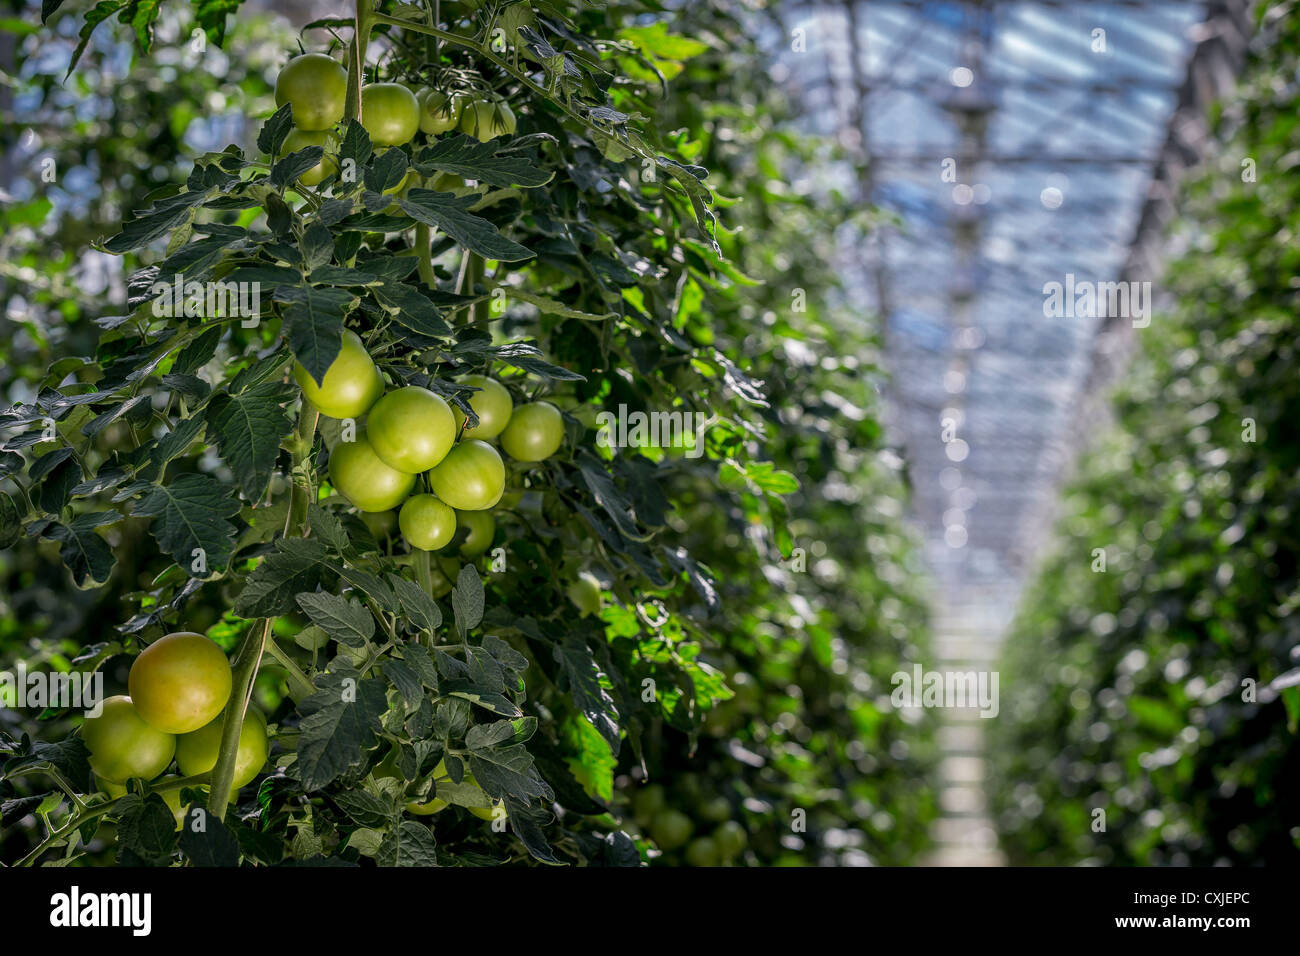 Tomatoes in greenhouse, Iceland Greenhouses are heated with geothermal energy keeping the cost of energy affordable and clean. Stock Photo